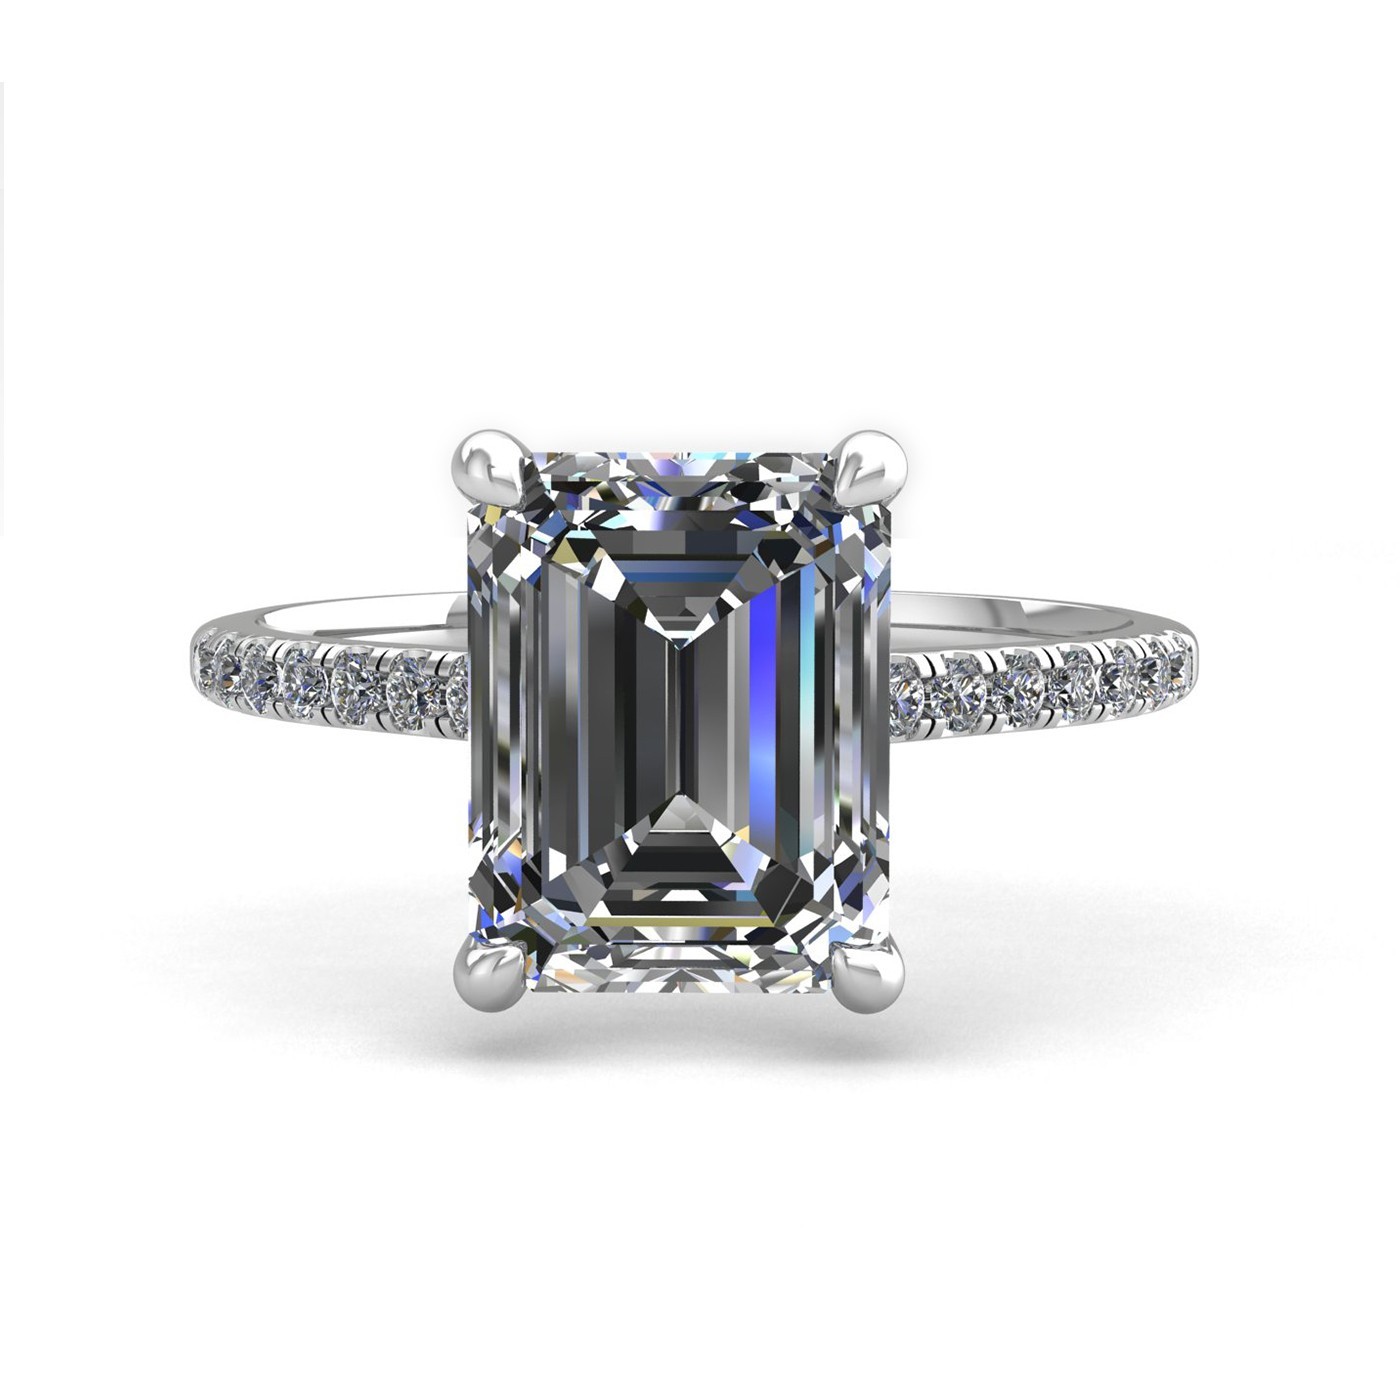 18k white gold 2.0ct 4 prongs emerald cut diamond engagement ring with whisper thin pavÉ set band Photos & images